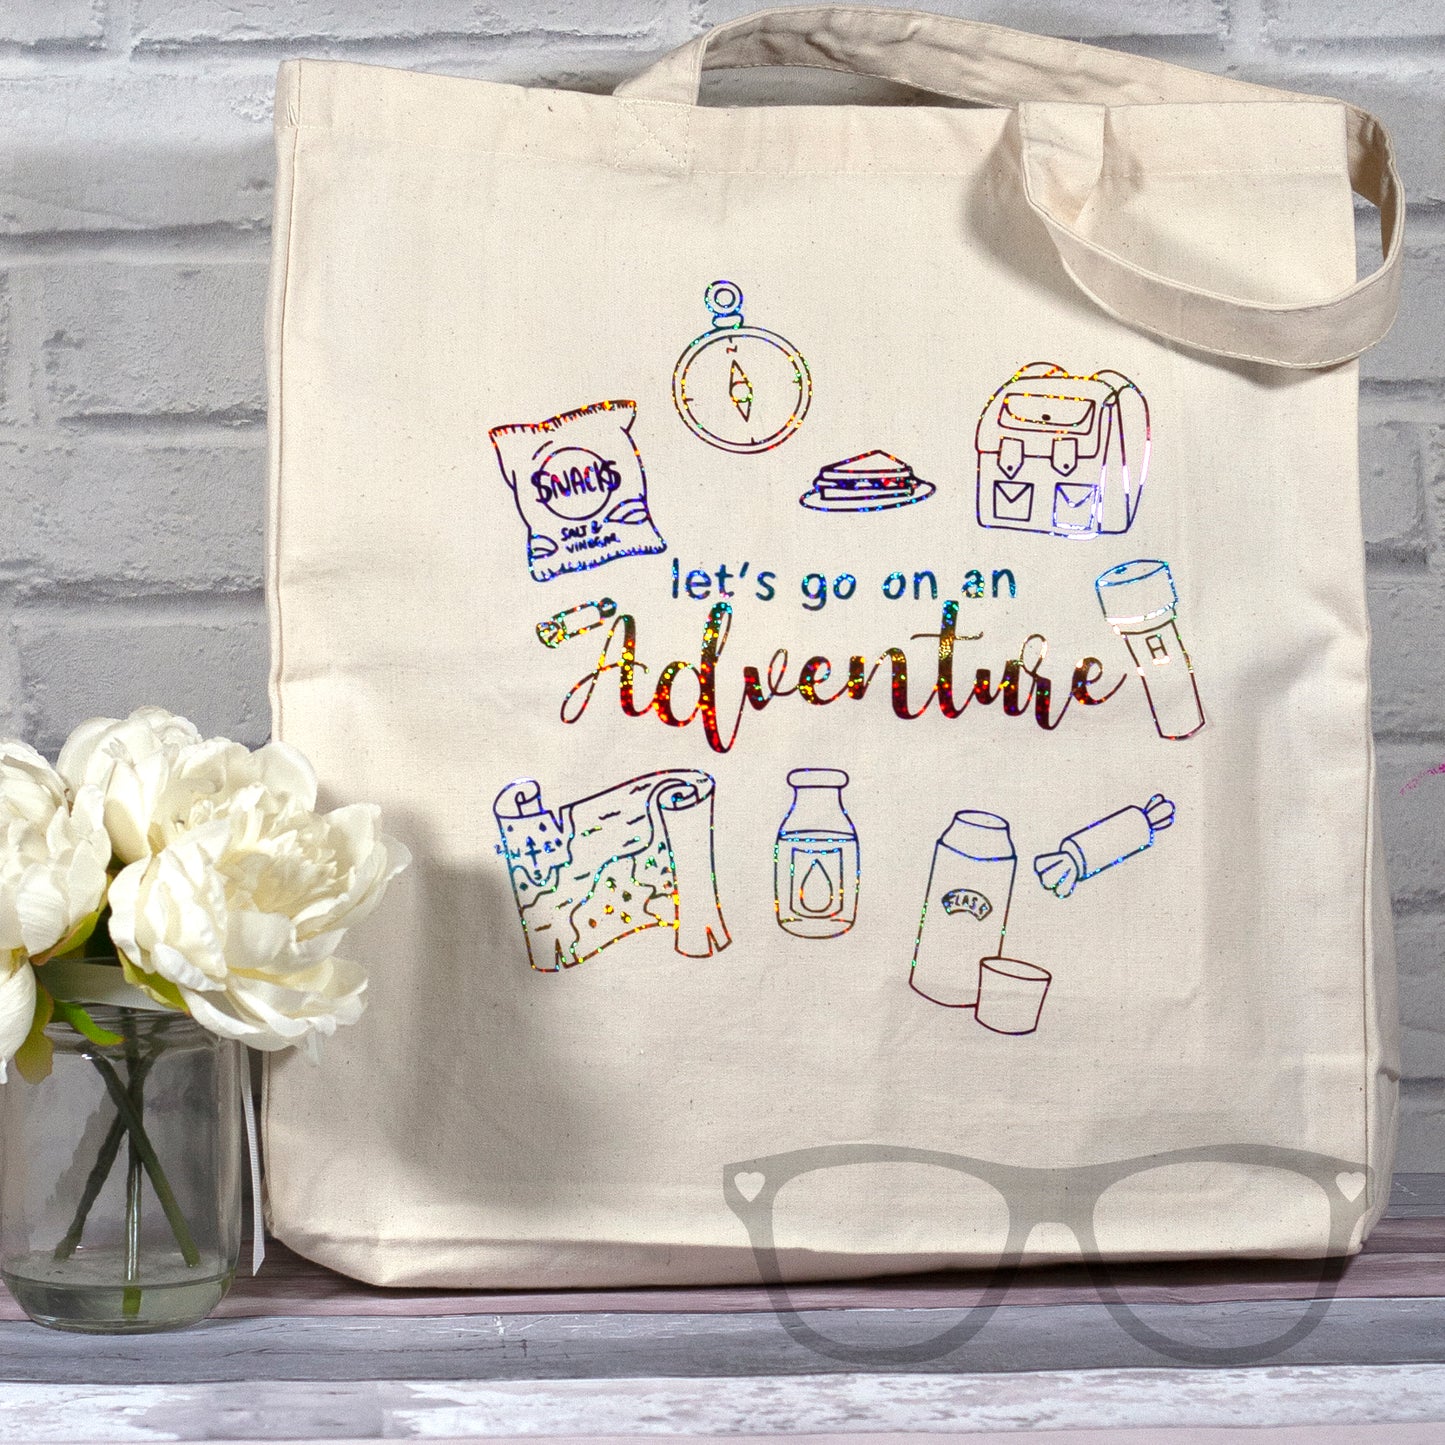 Canvas Tote bag, "Let's go on an Adventure" canvas shopping bag for geeks